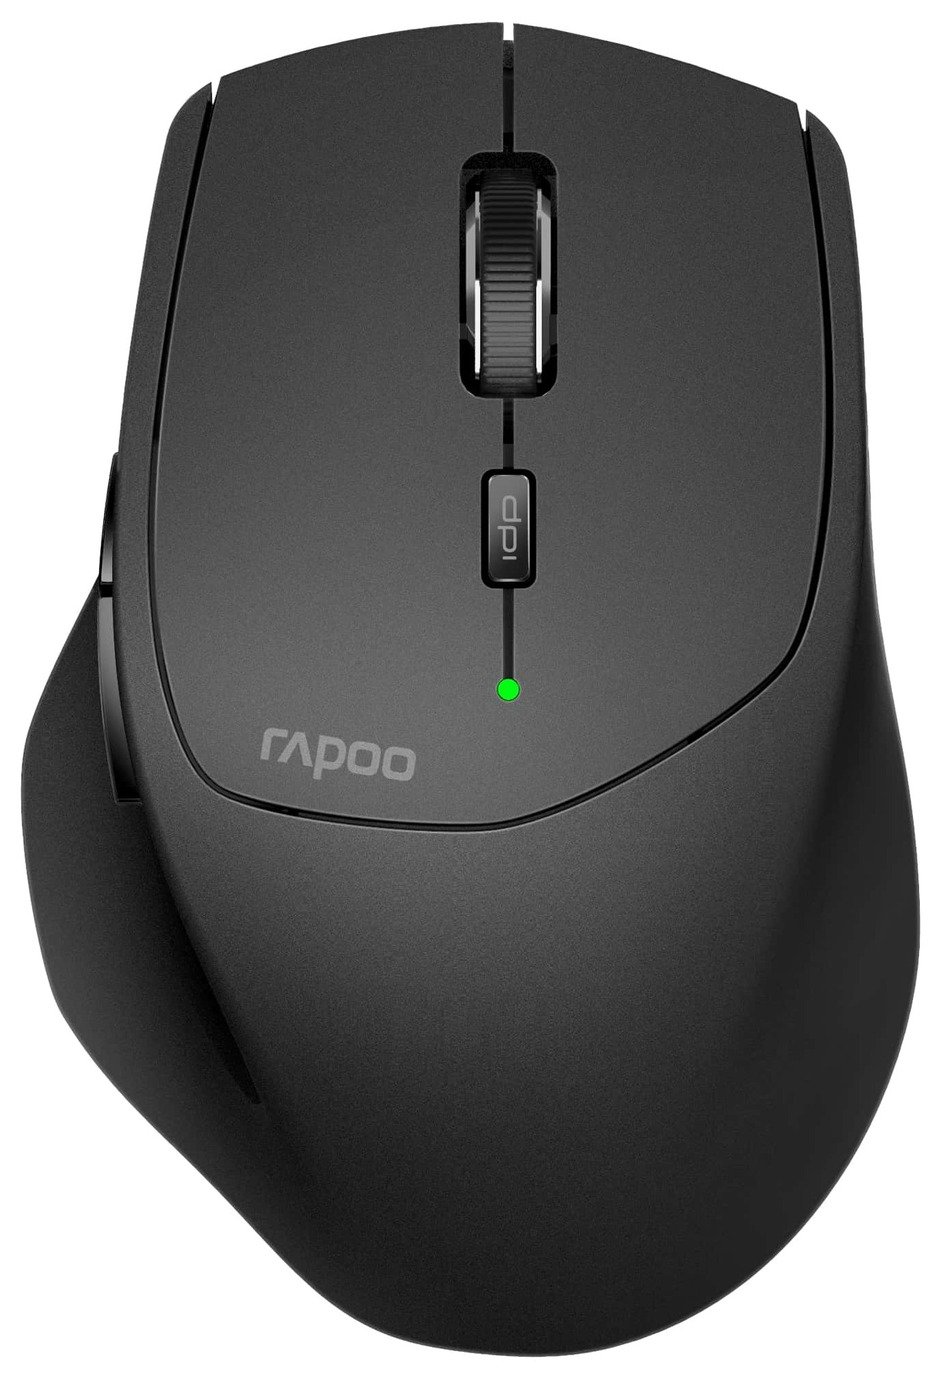 Rapoo MT550 Multi-Mode Optical Wireless Mouse review